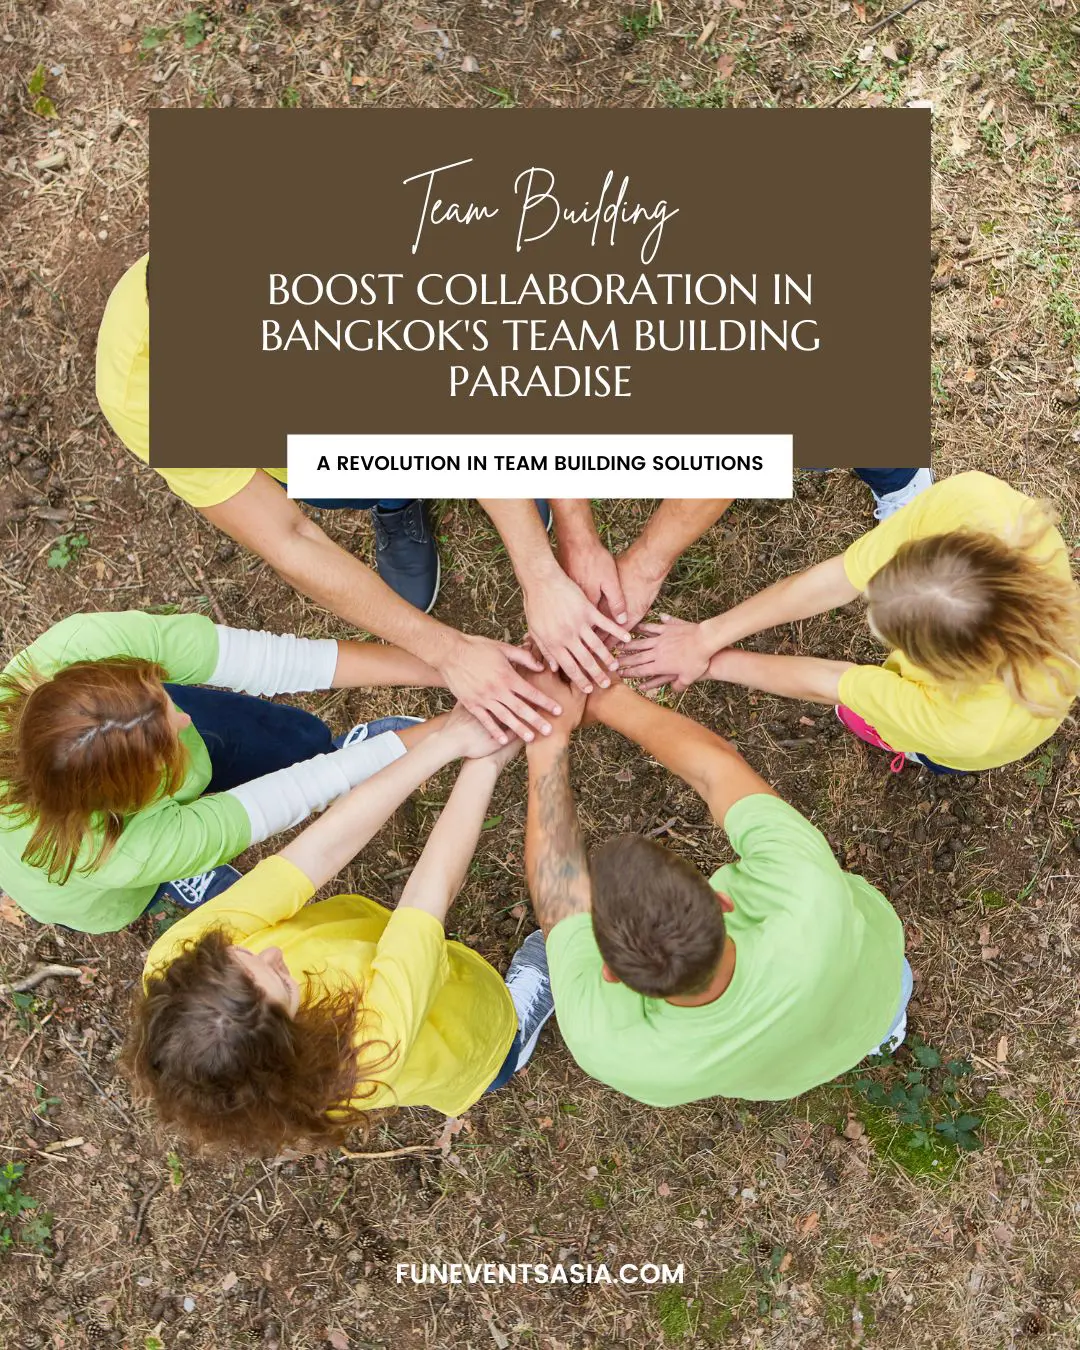 Boost Collaboration in Bangkok's Team Building Paradise